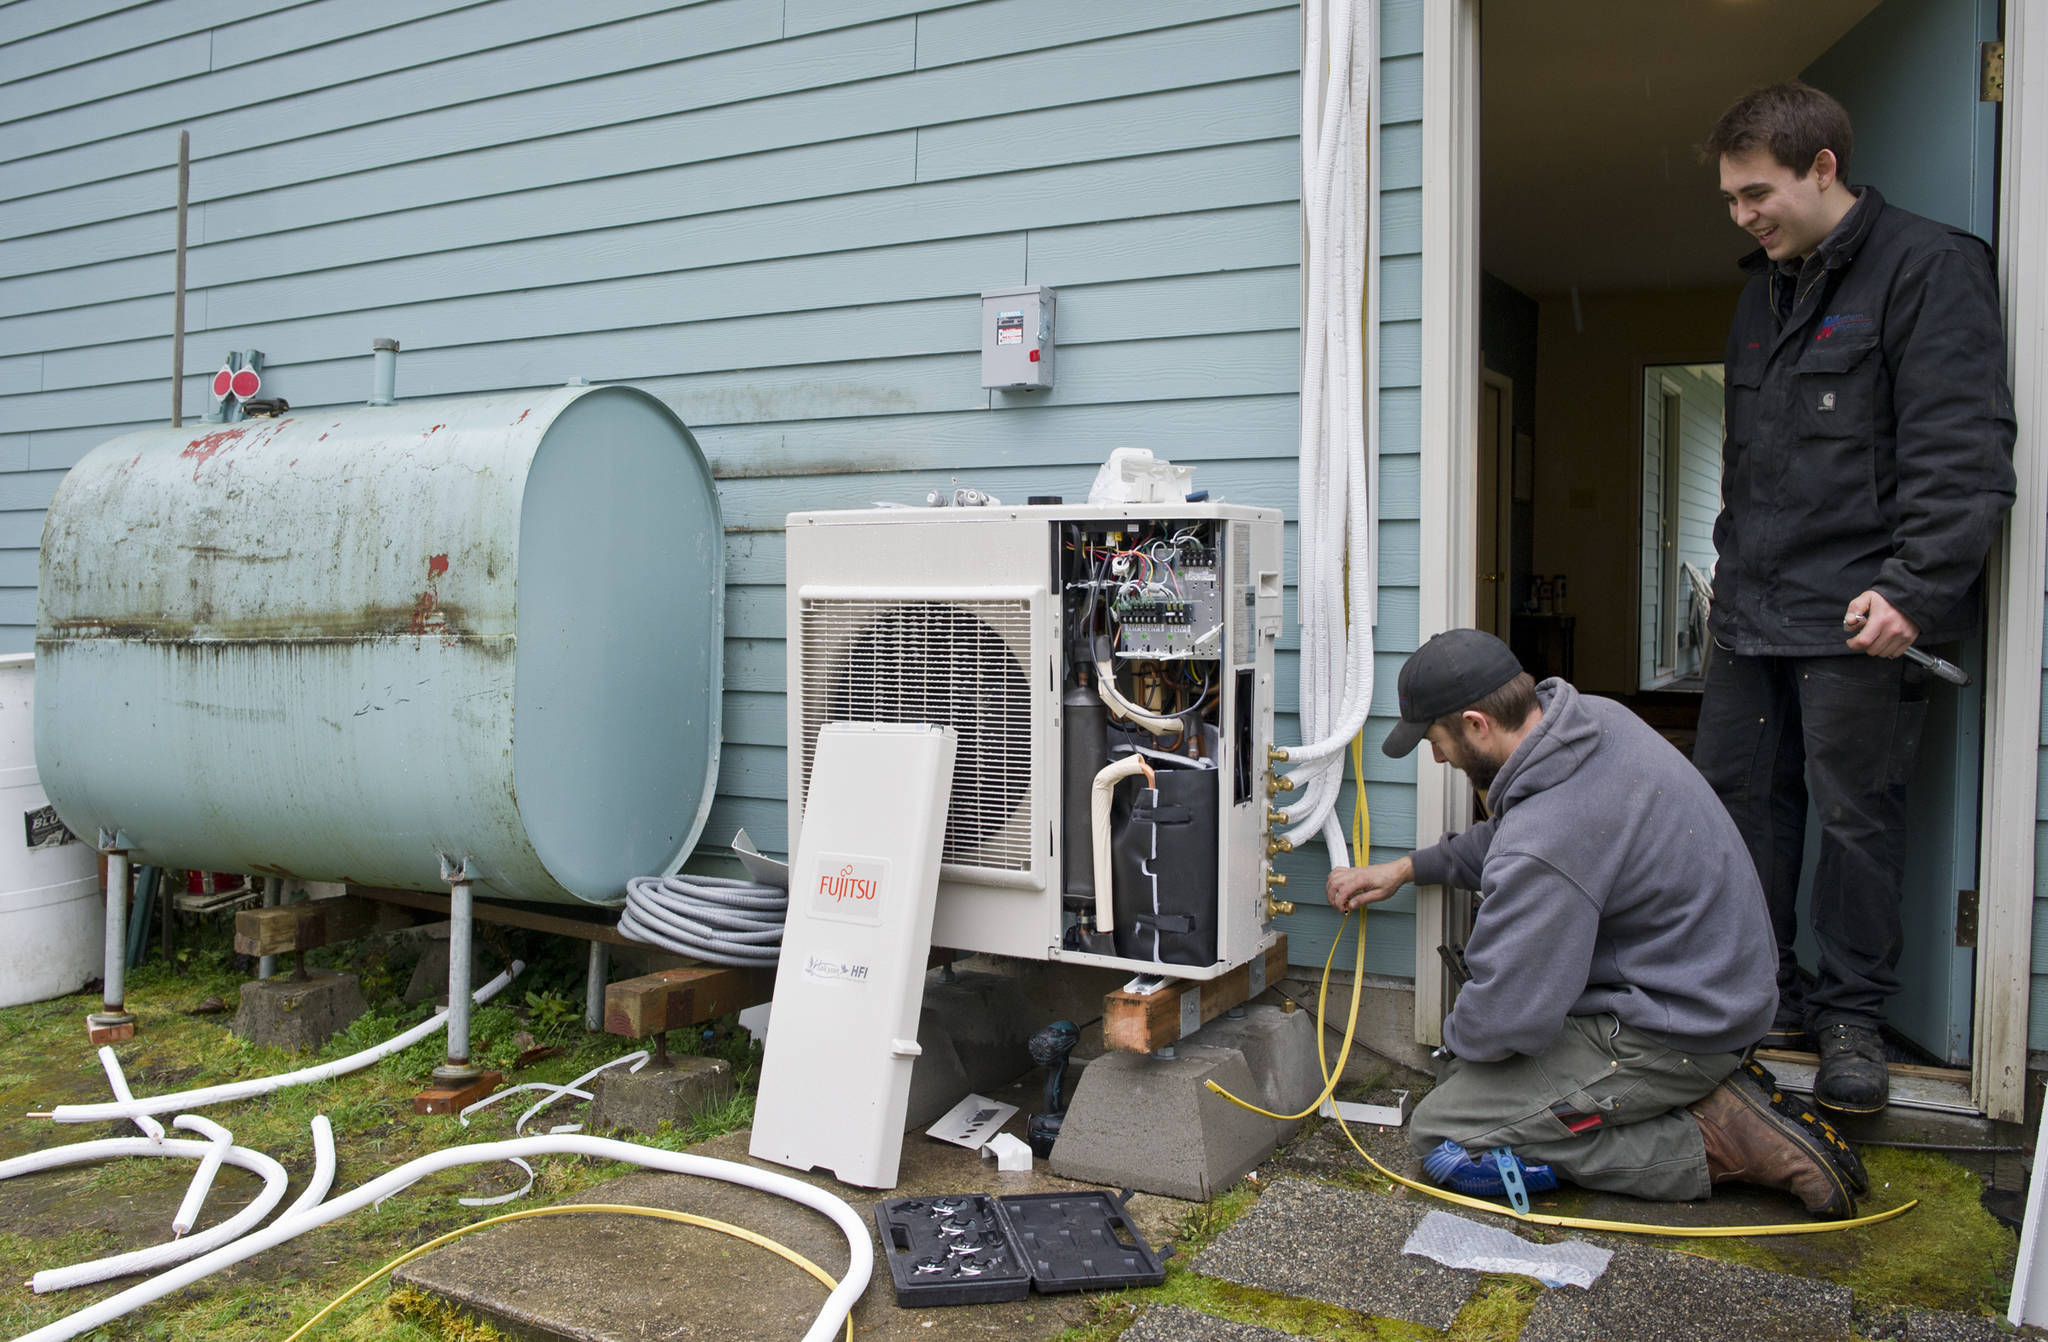 Air-source heat pumps, like the one in this 2015 photo of Jake Eames, right, and David Nash installing a pump, are an example of a load-side technology that can increase energy efficiency. "Load-side technologies are absolutely key to our ability to reduce greenhouse emissions in the energy sector,” said director of energy services at Alaska Electric Light and Power Alec Mesdag.